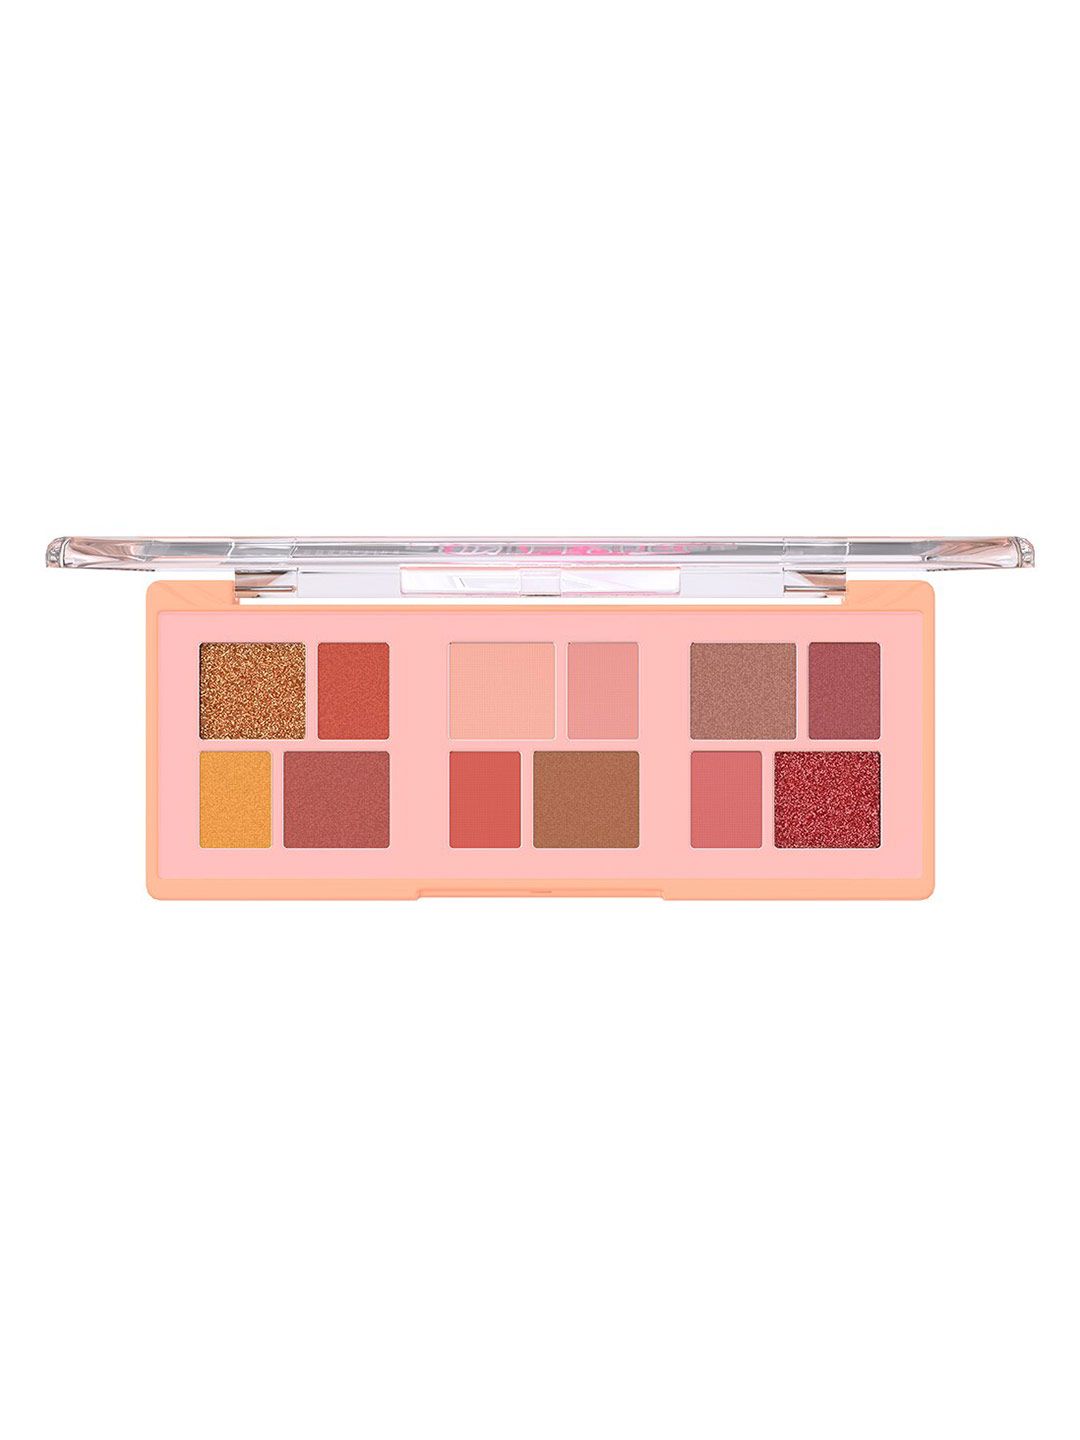 SHRYOAN 12 Colour Eyeshadow Palette Price in India